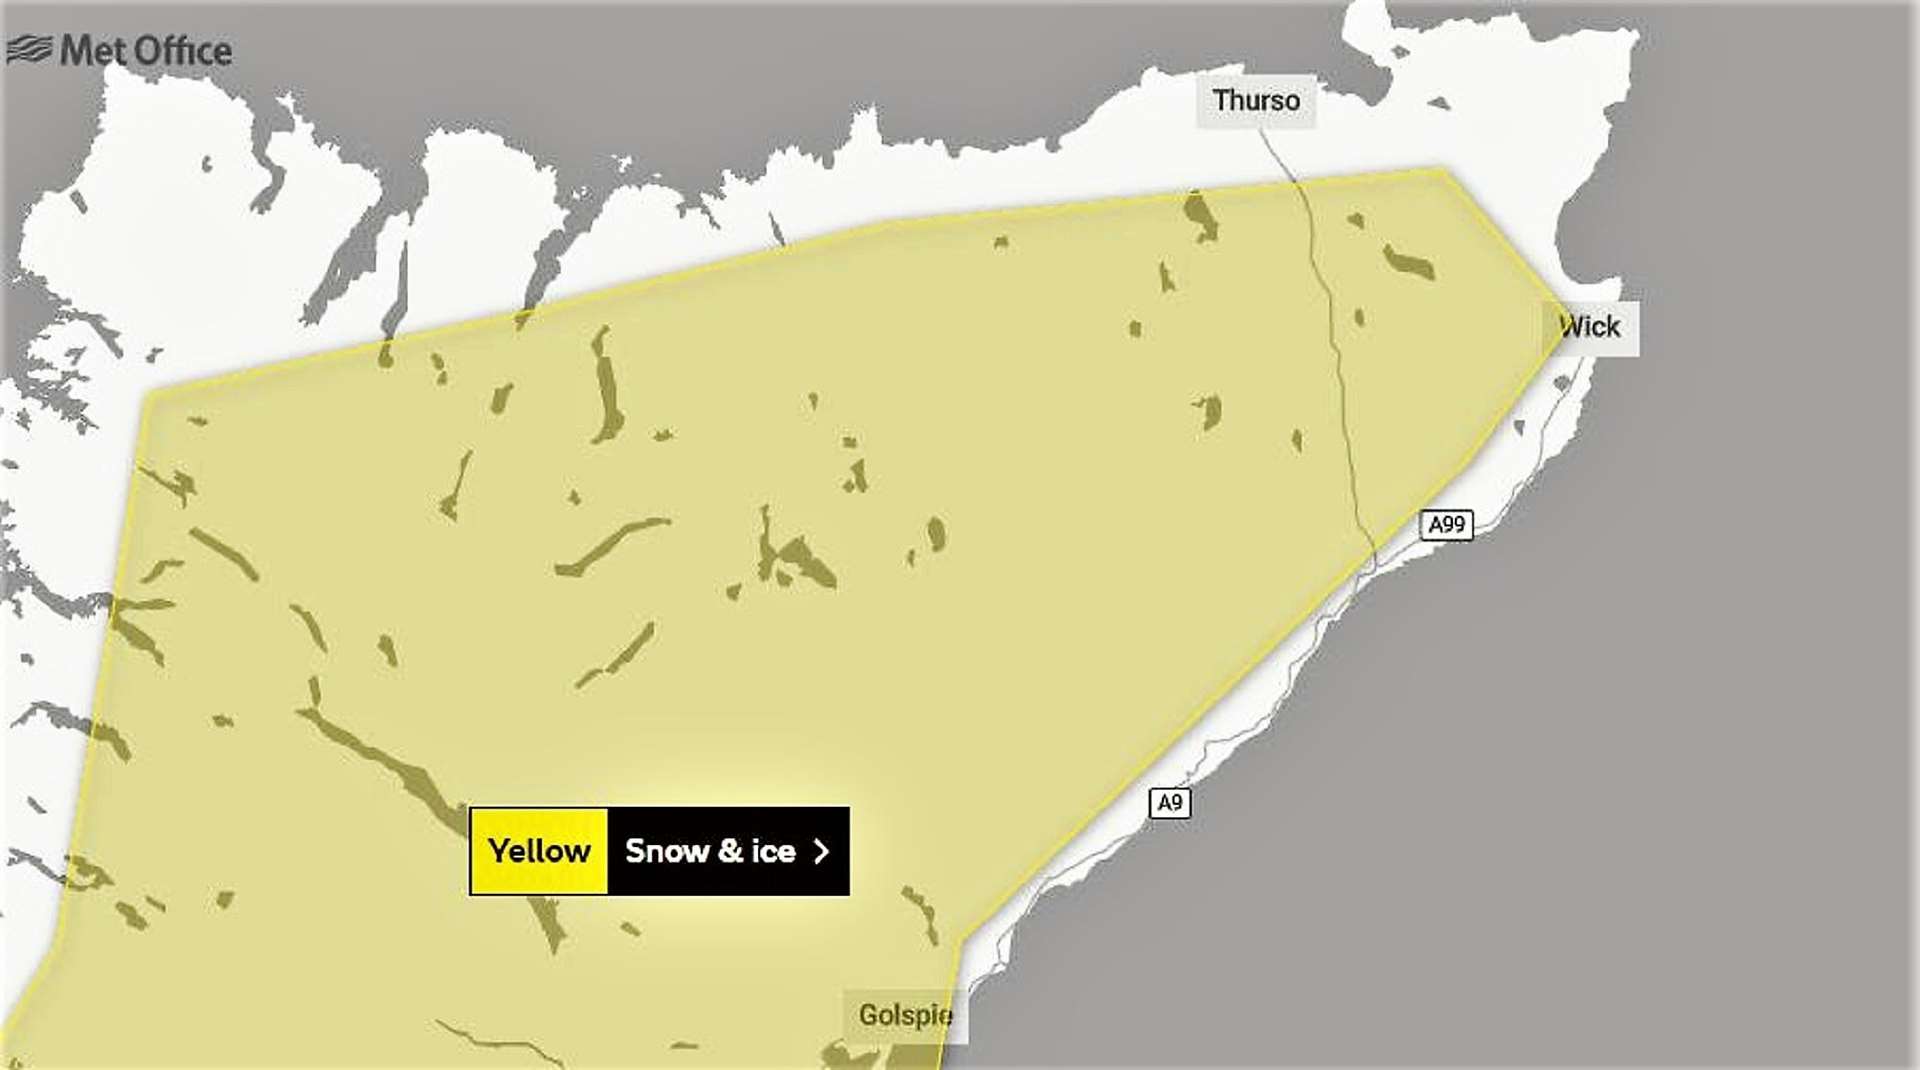 Met Office map warning of snow and ice for Friday.